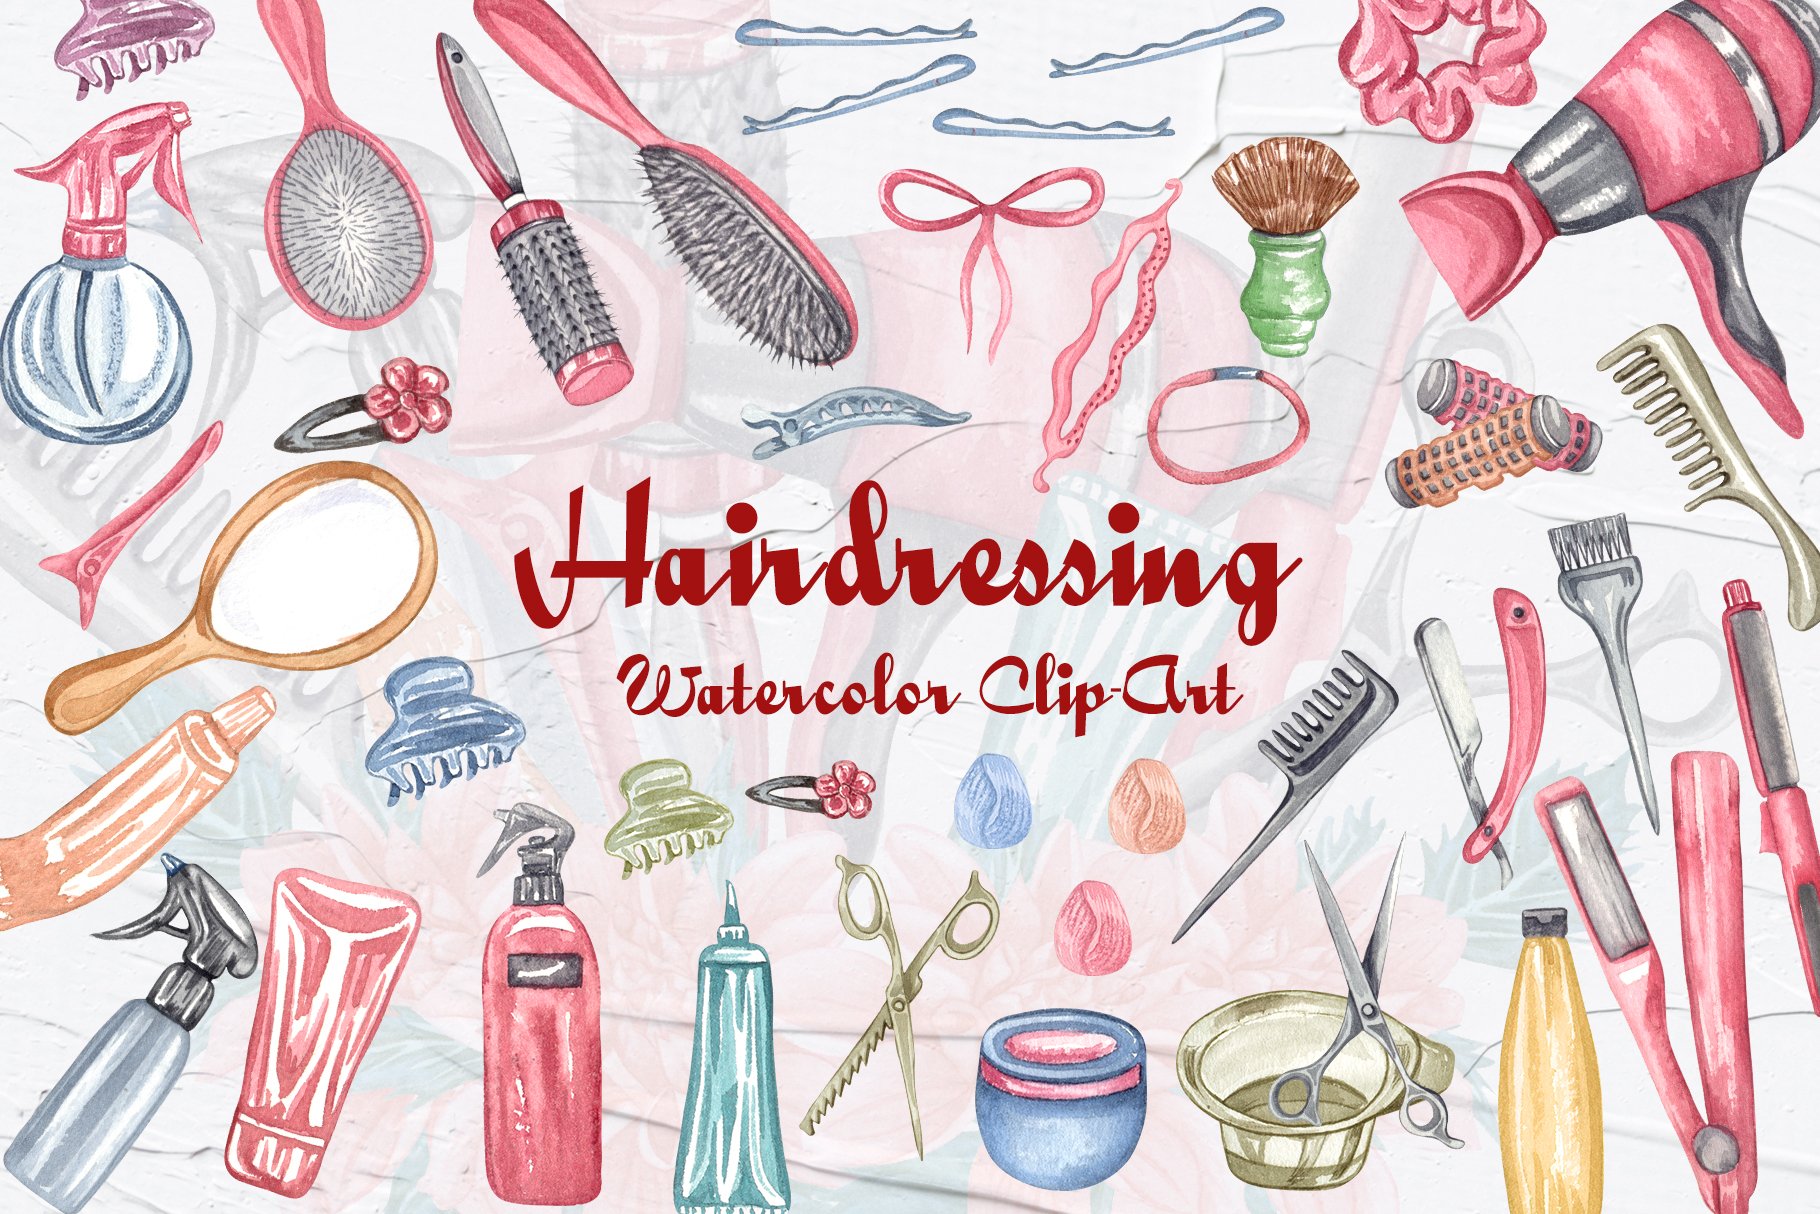 Hairdressing Watercolor Clipart cover image.